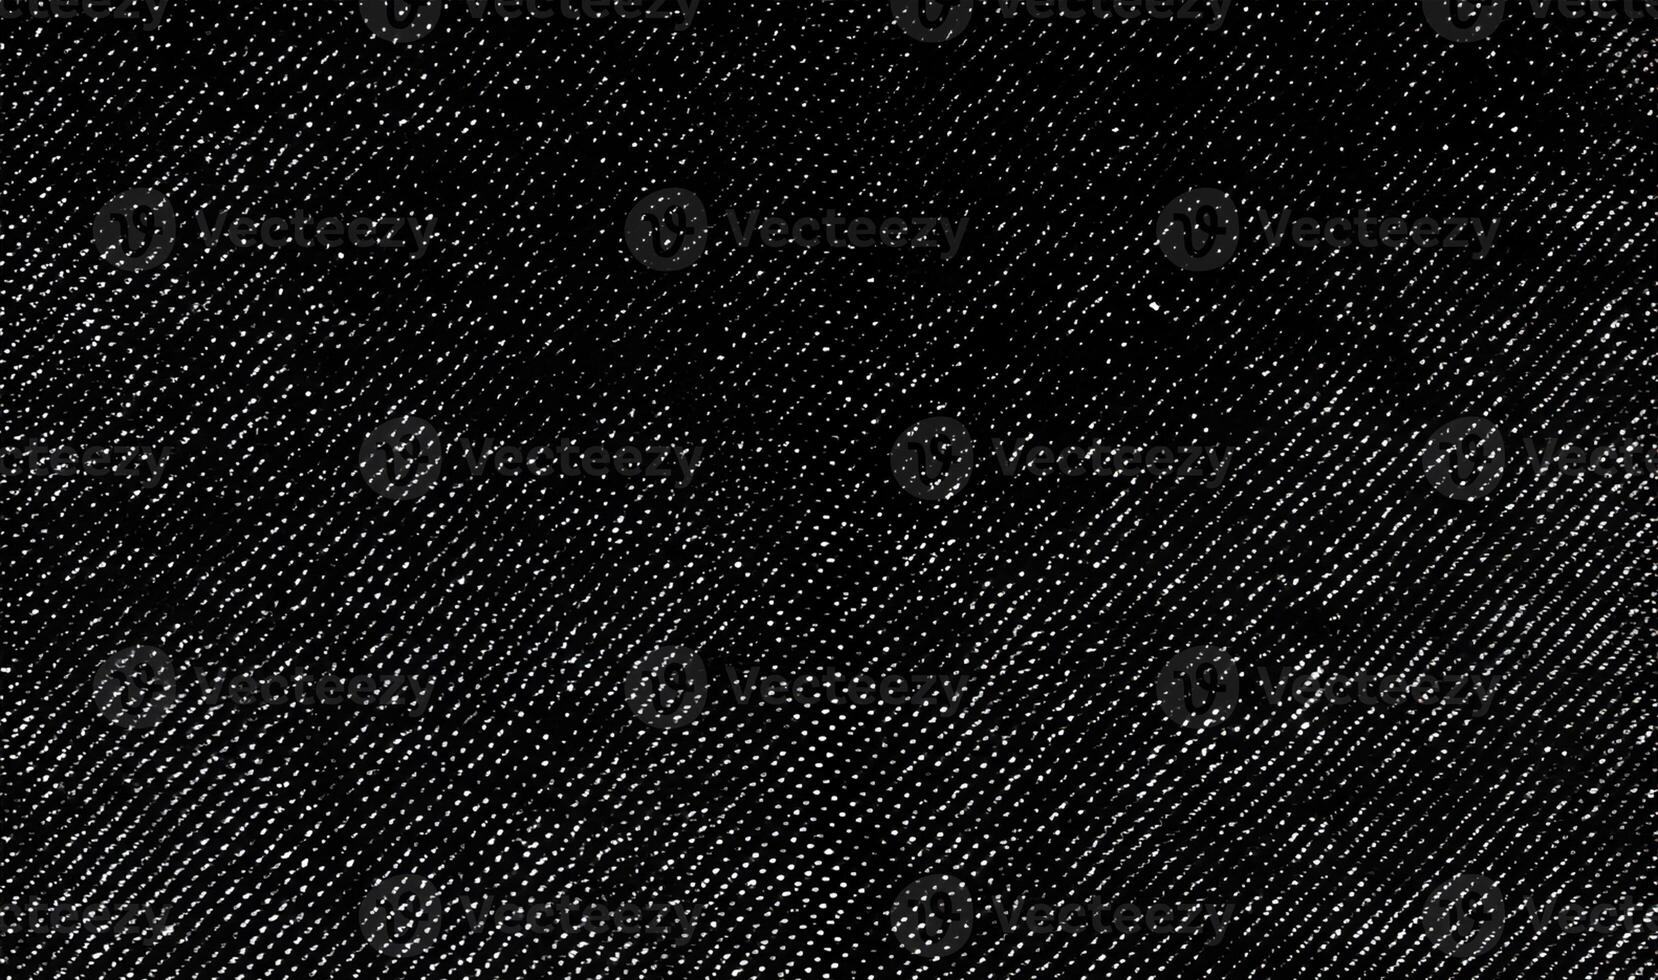 fabric texture. Distressed texture of weaving fabric. Grunge background. Abstract halftone illustration. Overlay to create interesting effect and depth. Black isolated on white. photo